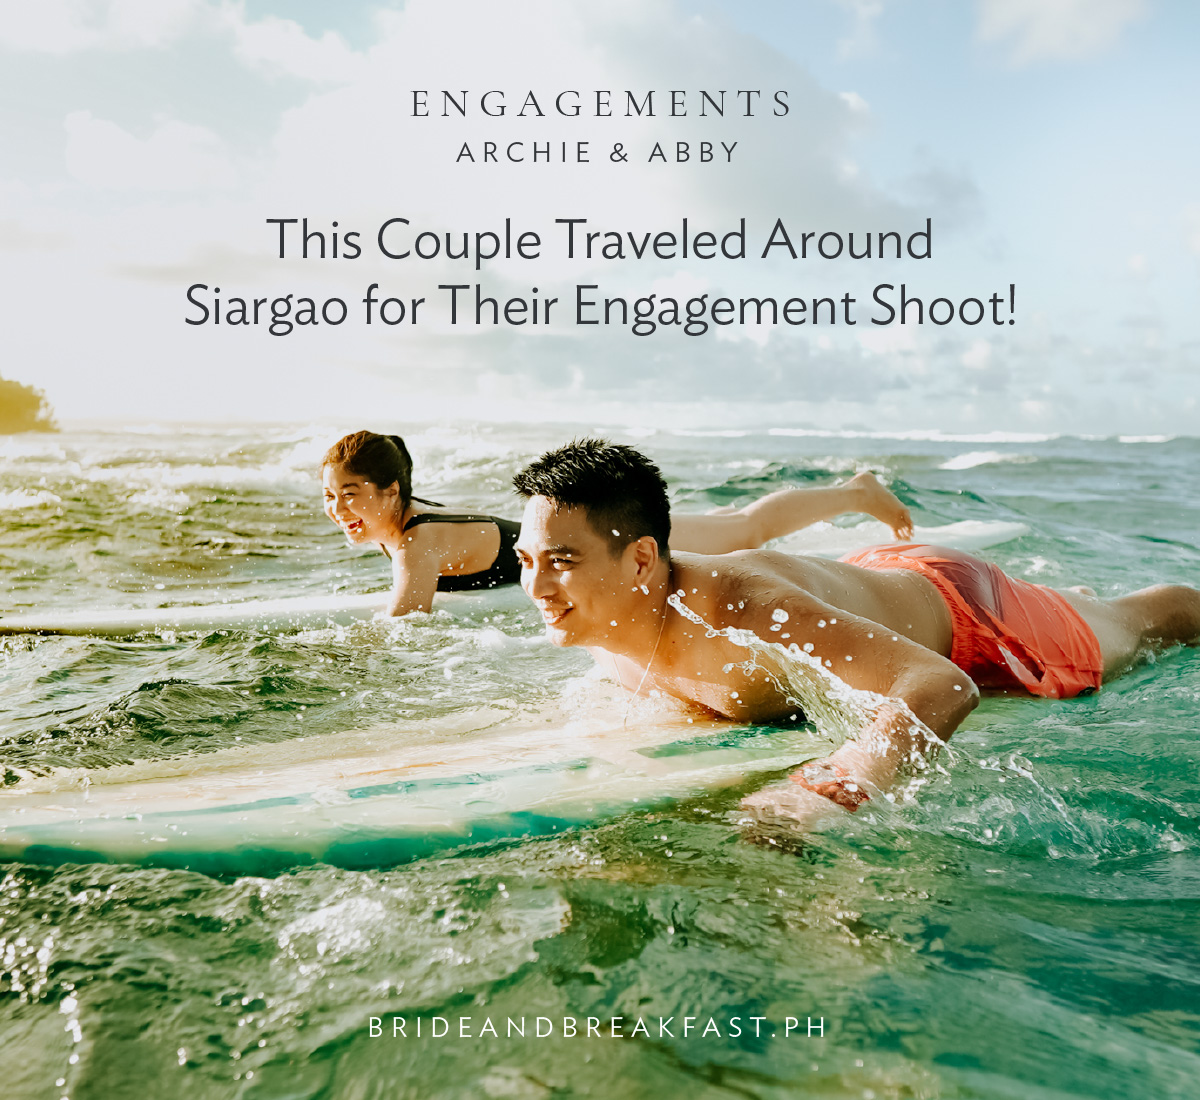 This Couple Traveled Around Siargao for Their Engagement Shoot!